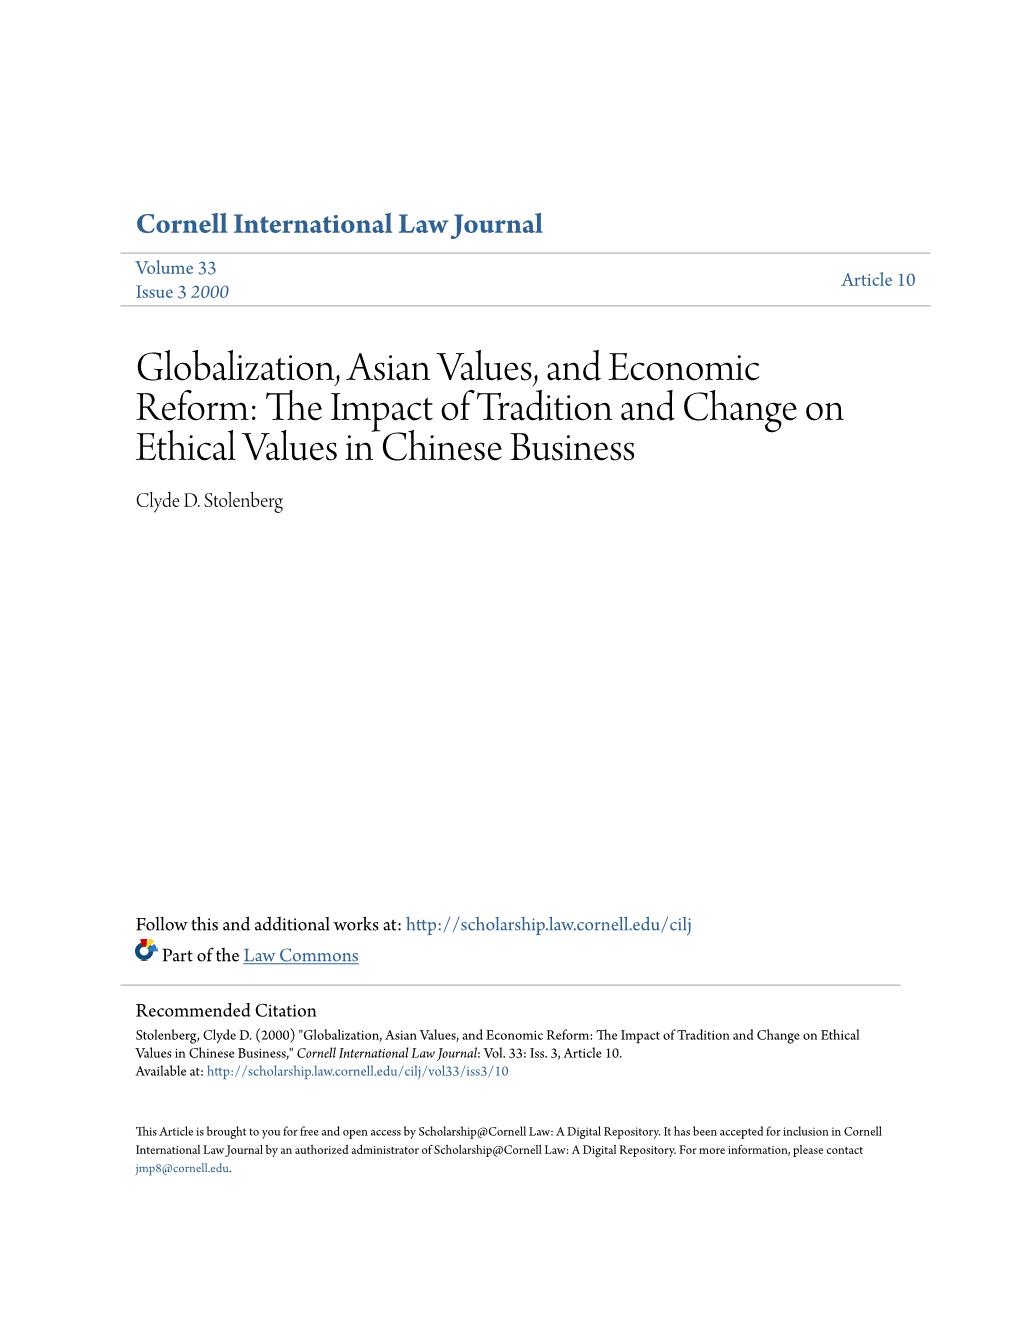 Globalization, Asian Values, and Economic Reform: the Impact Of